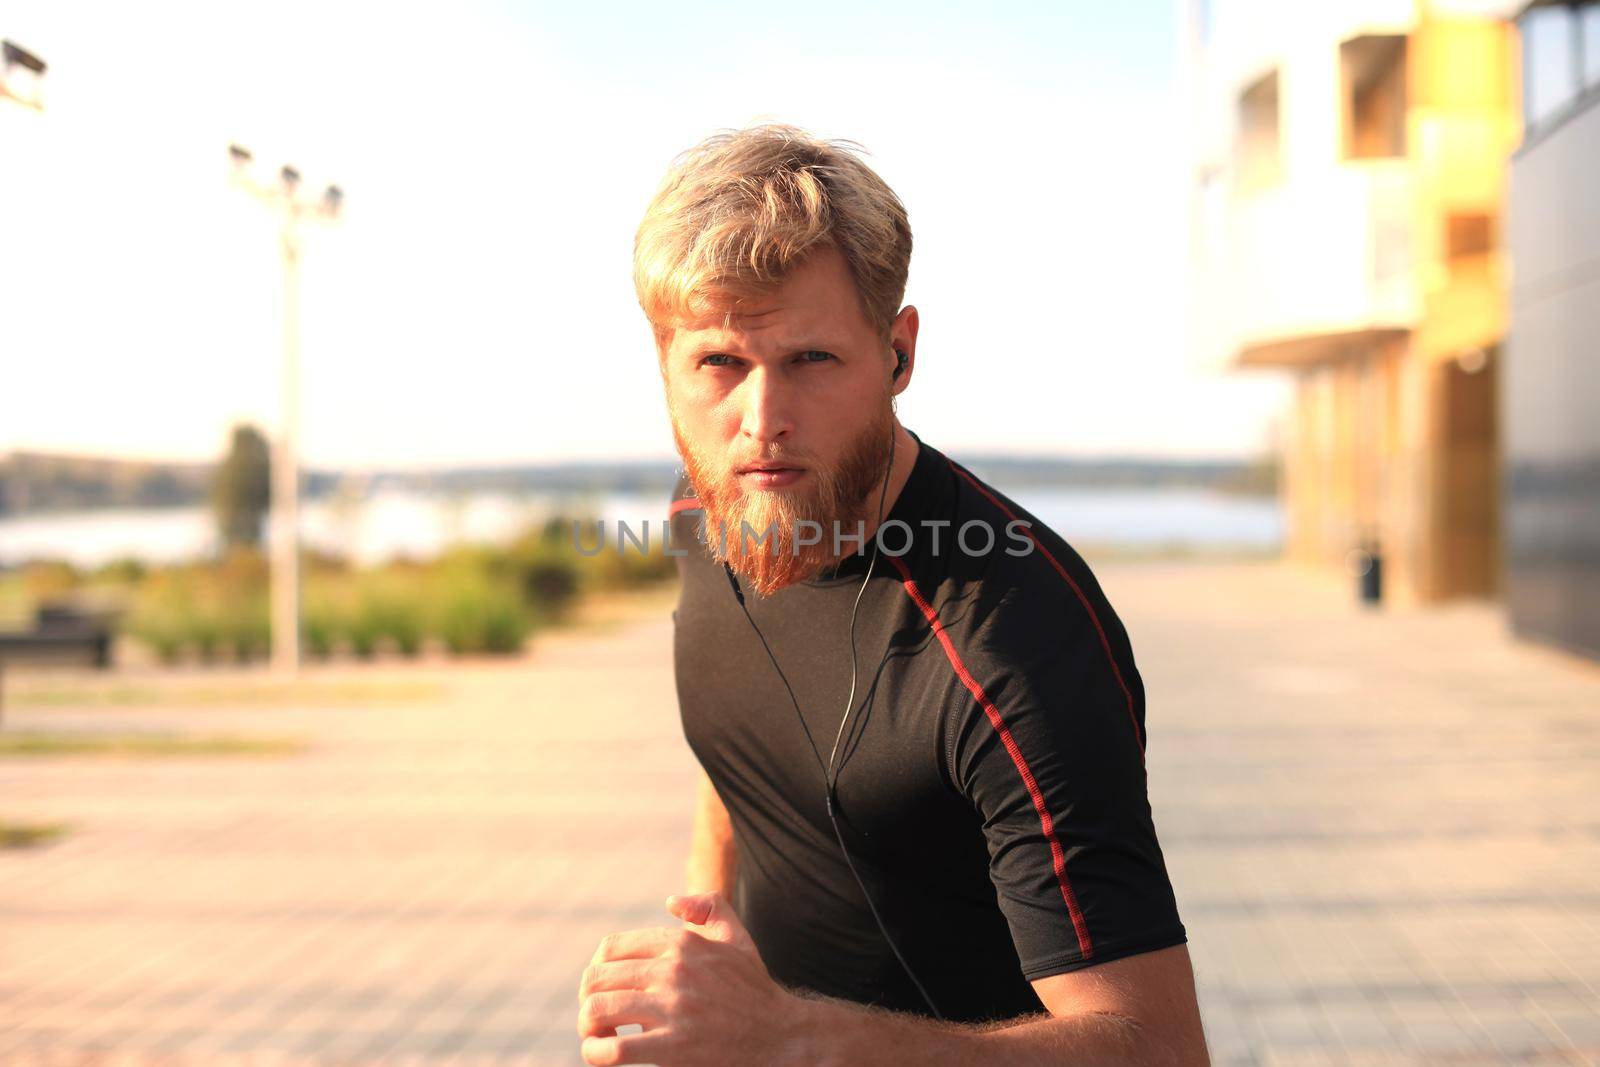 Fit athlete. Handsome adult man running outdoors to stay healthy, at sunset or sunrise. Runner by tsyhun